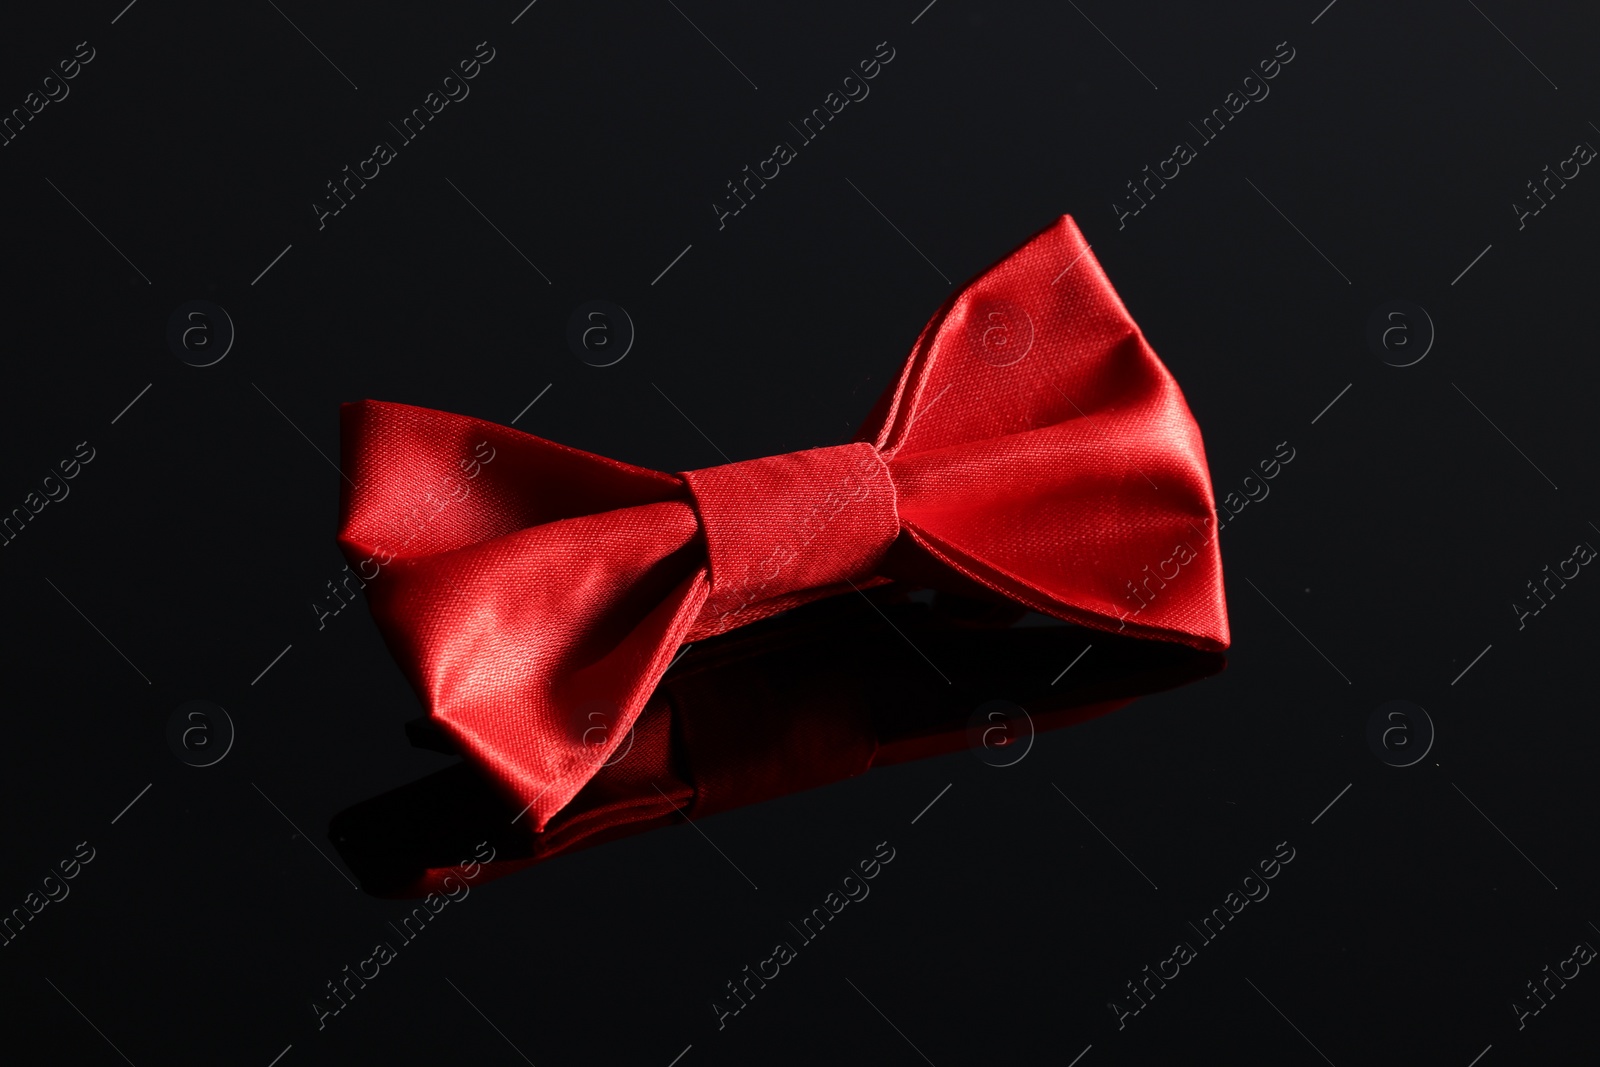 Photo of Stylish red bow tie on black mirror surface